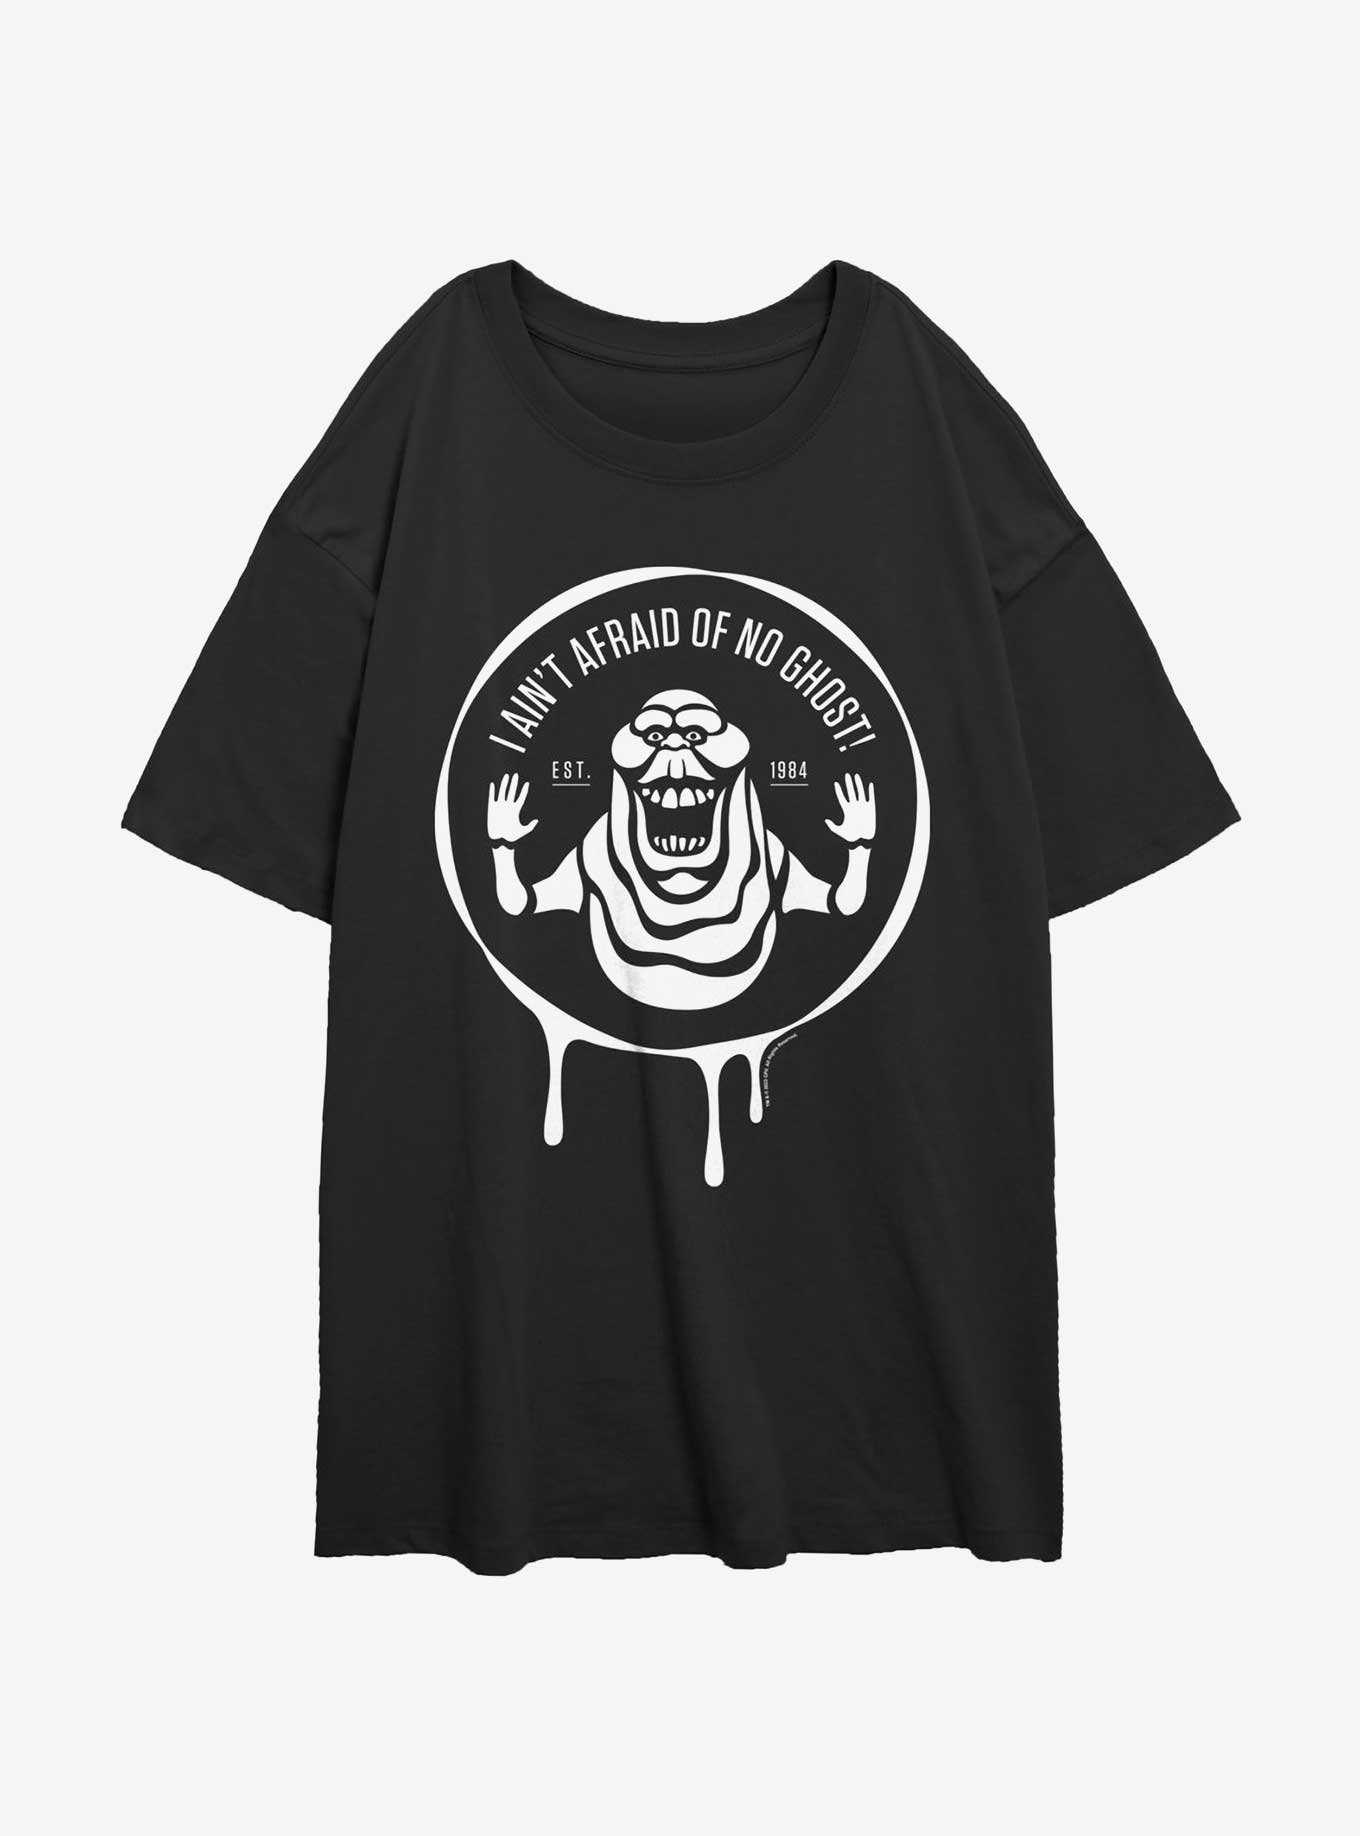 Ghostbusters 1984 Ain't Afraid Of No Ghost Badge Girls Oversized T-Shirt, , hi-res